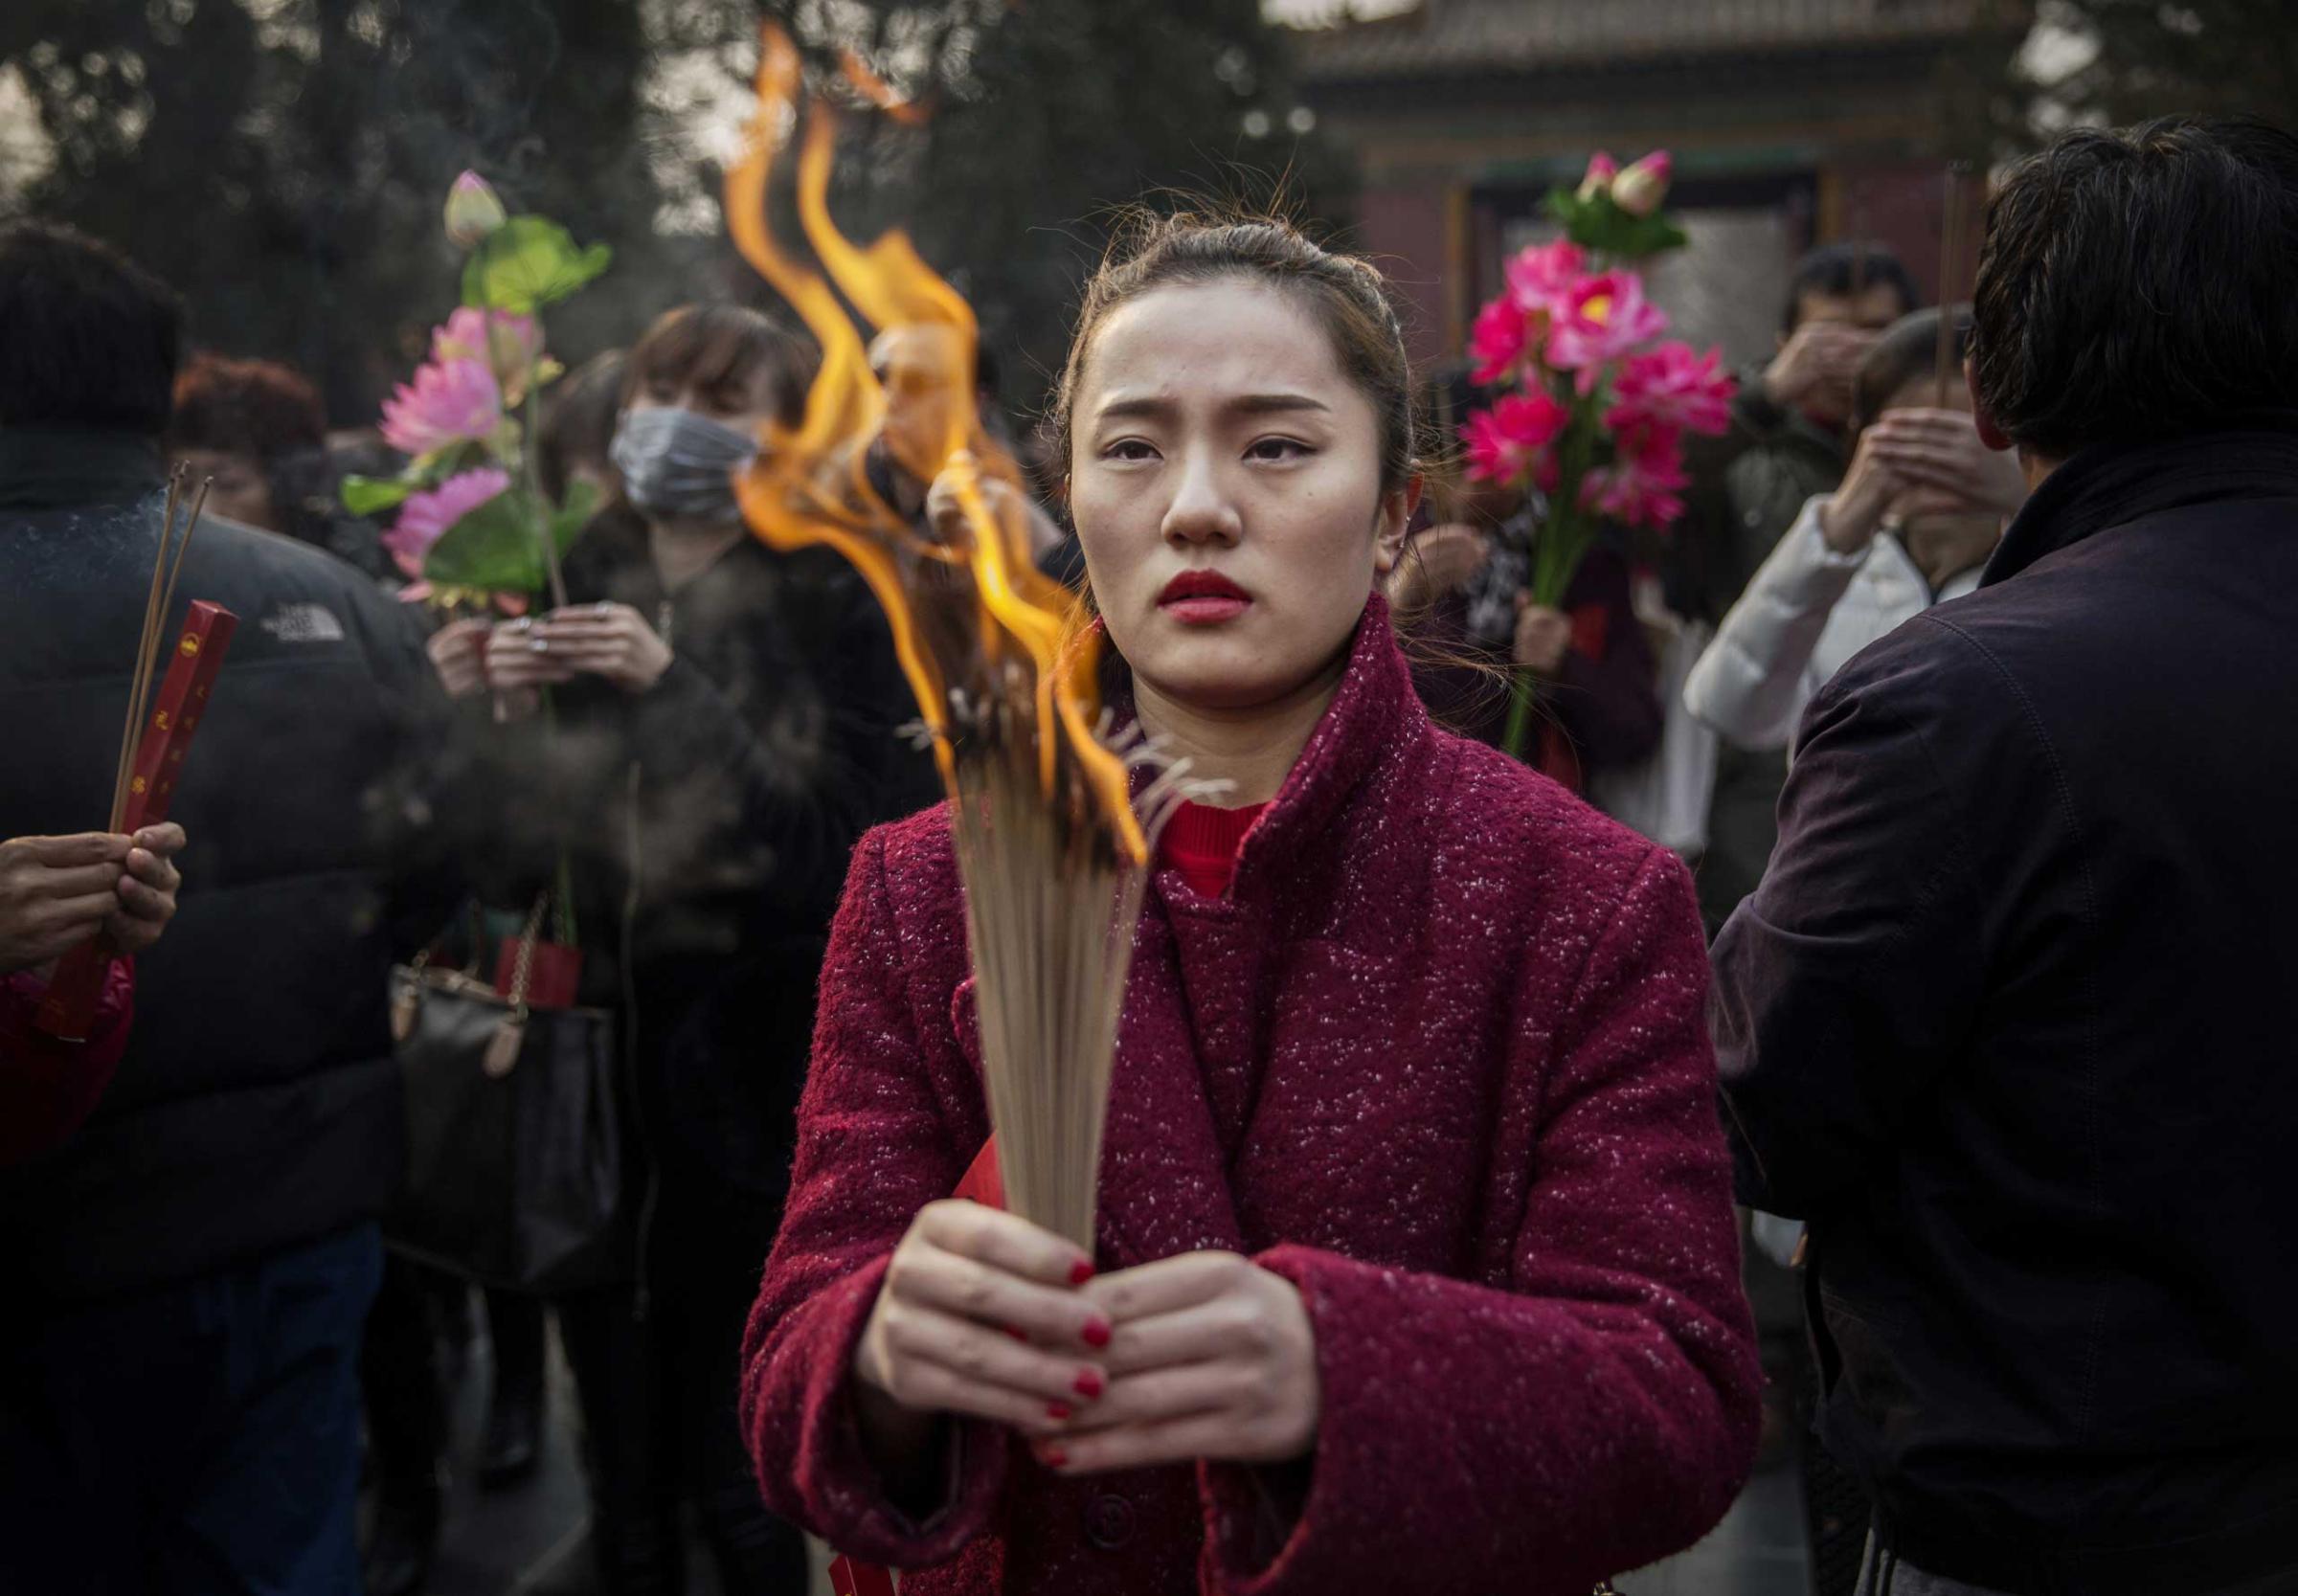 Chinese woman holds incense while praying with others at the Yonghegong Lama Temple during celebrations for the Lunar New Year, Feb. 19, 2015 in Beijing.